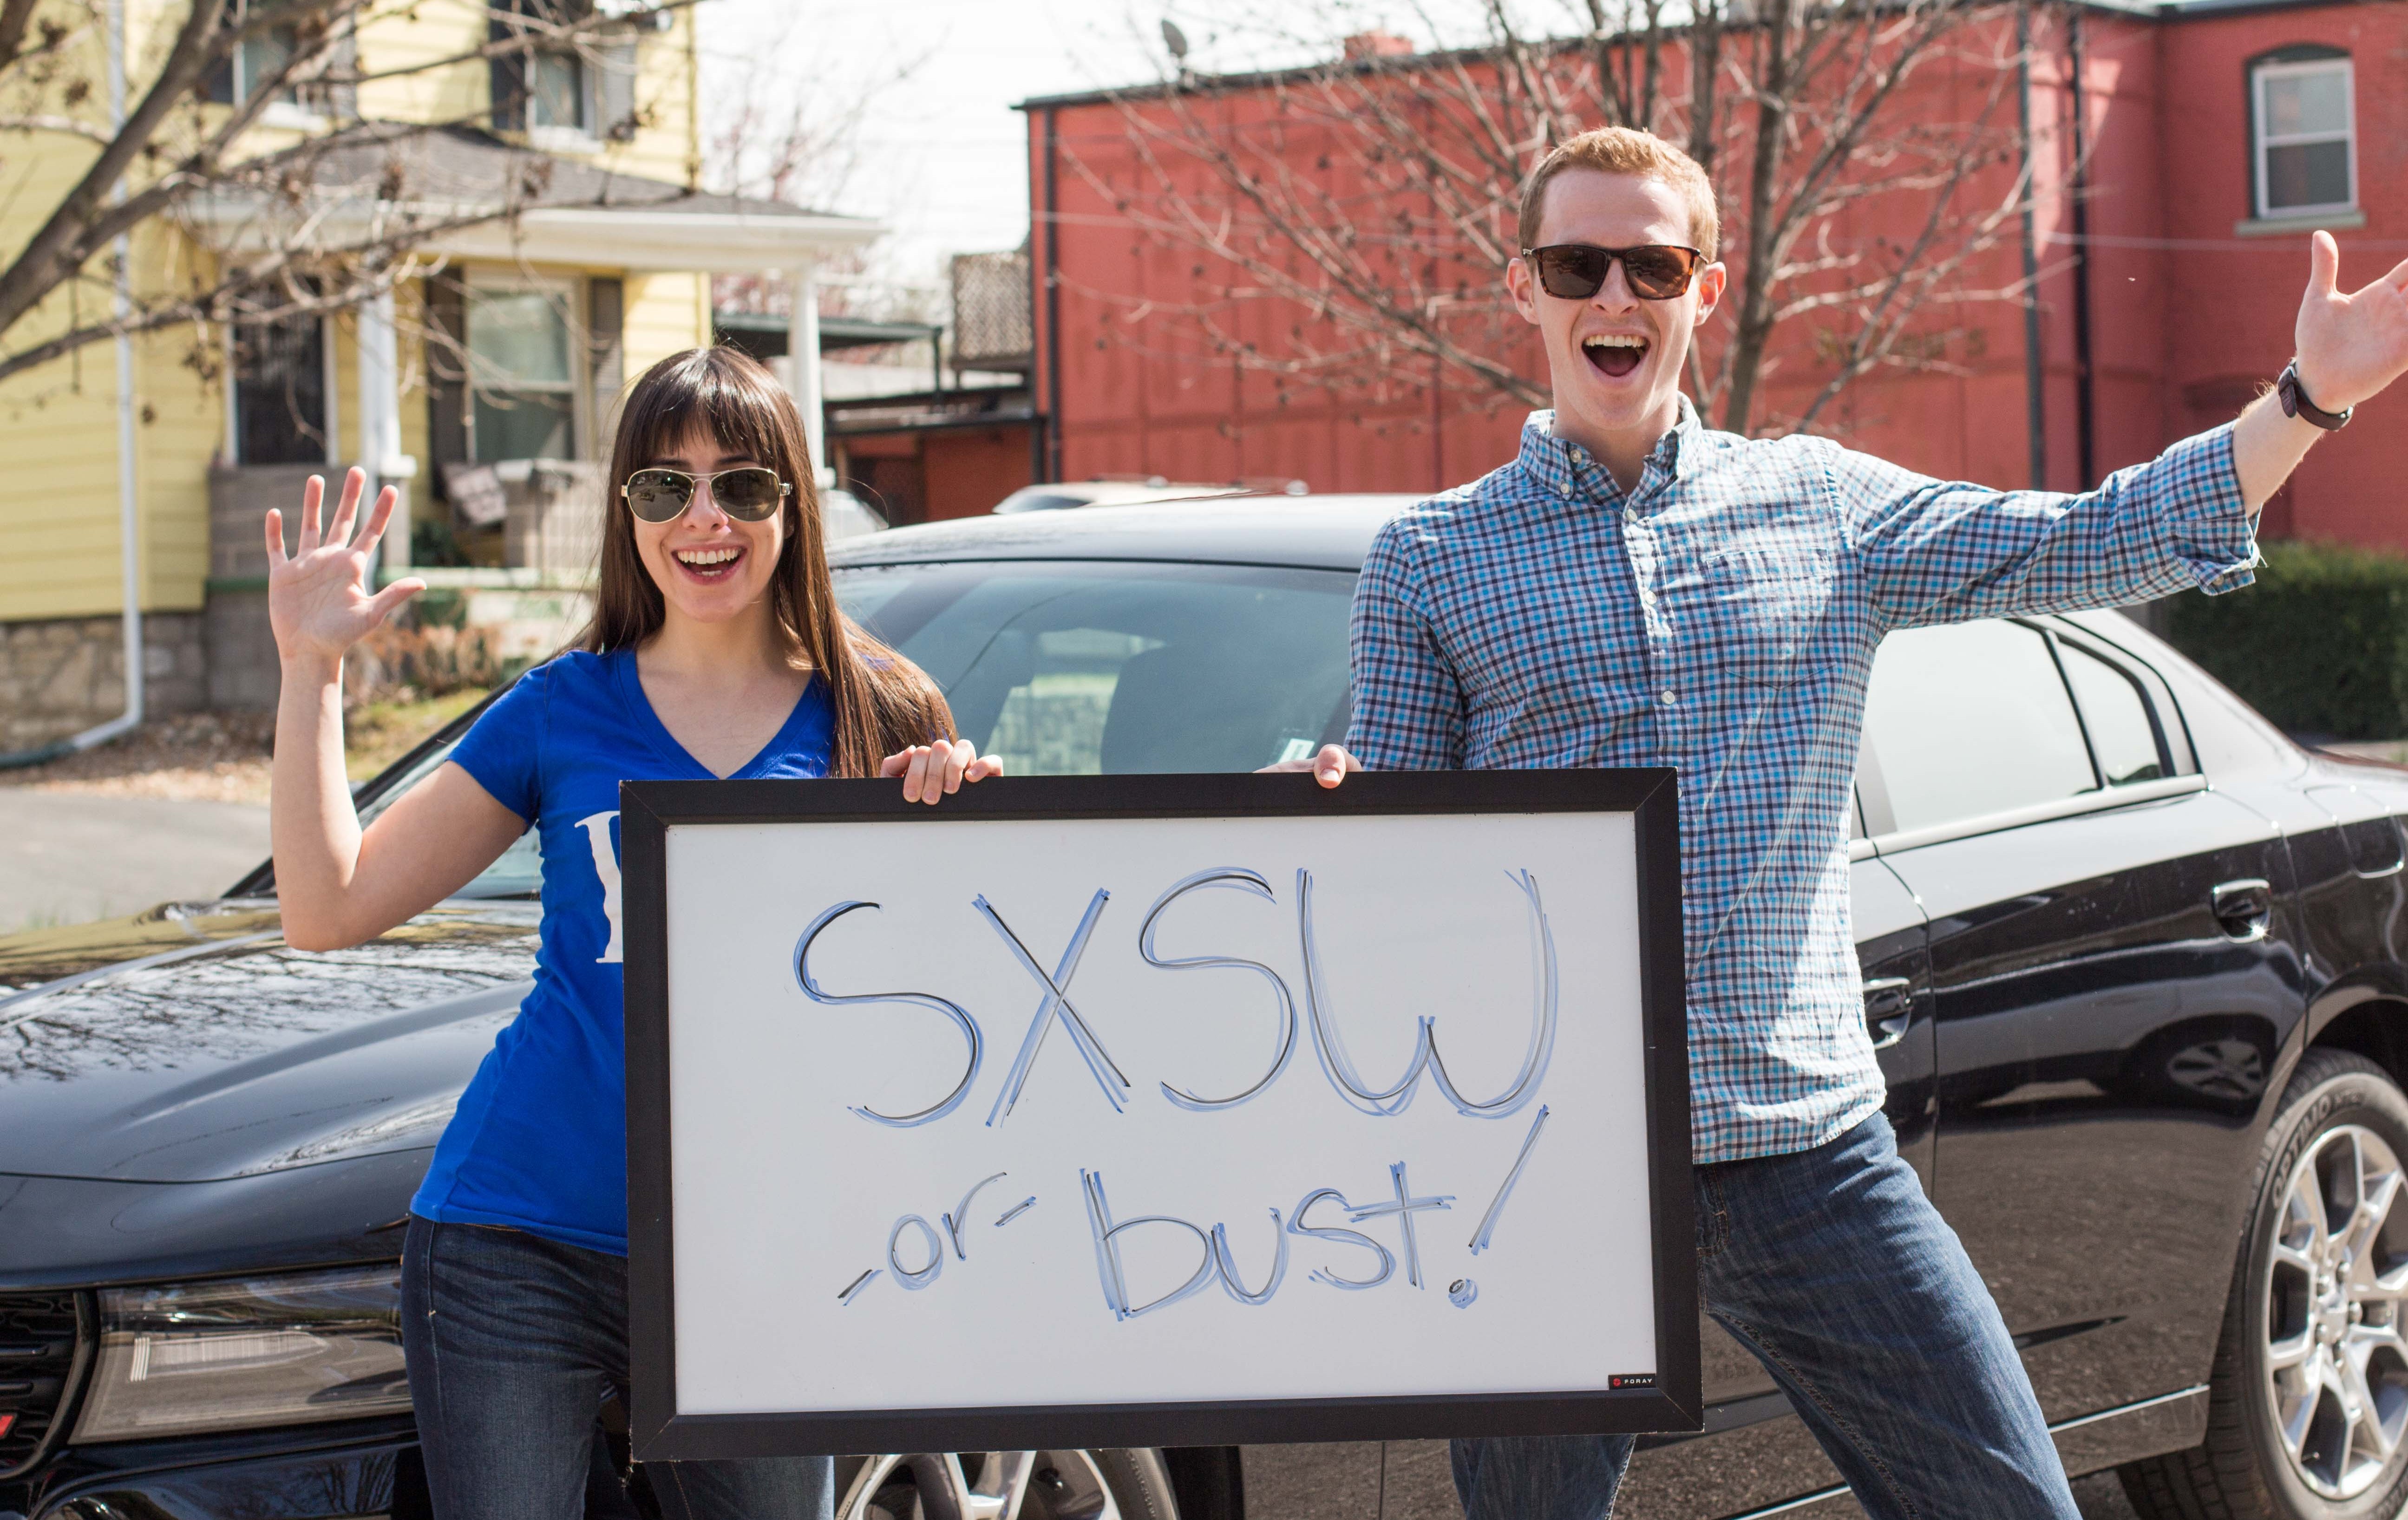 Startland News hits the road to SXSW